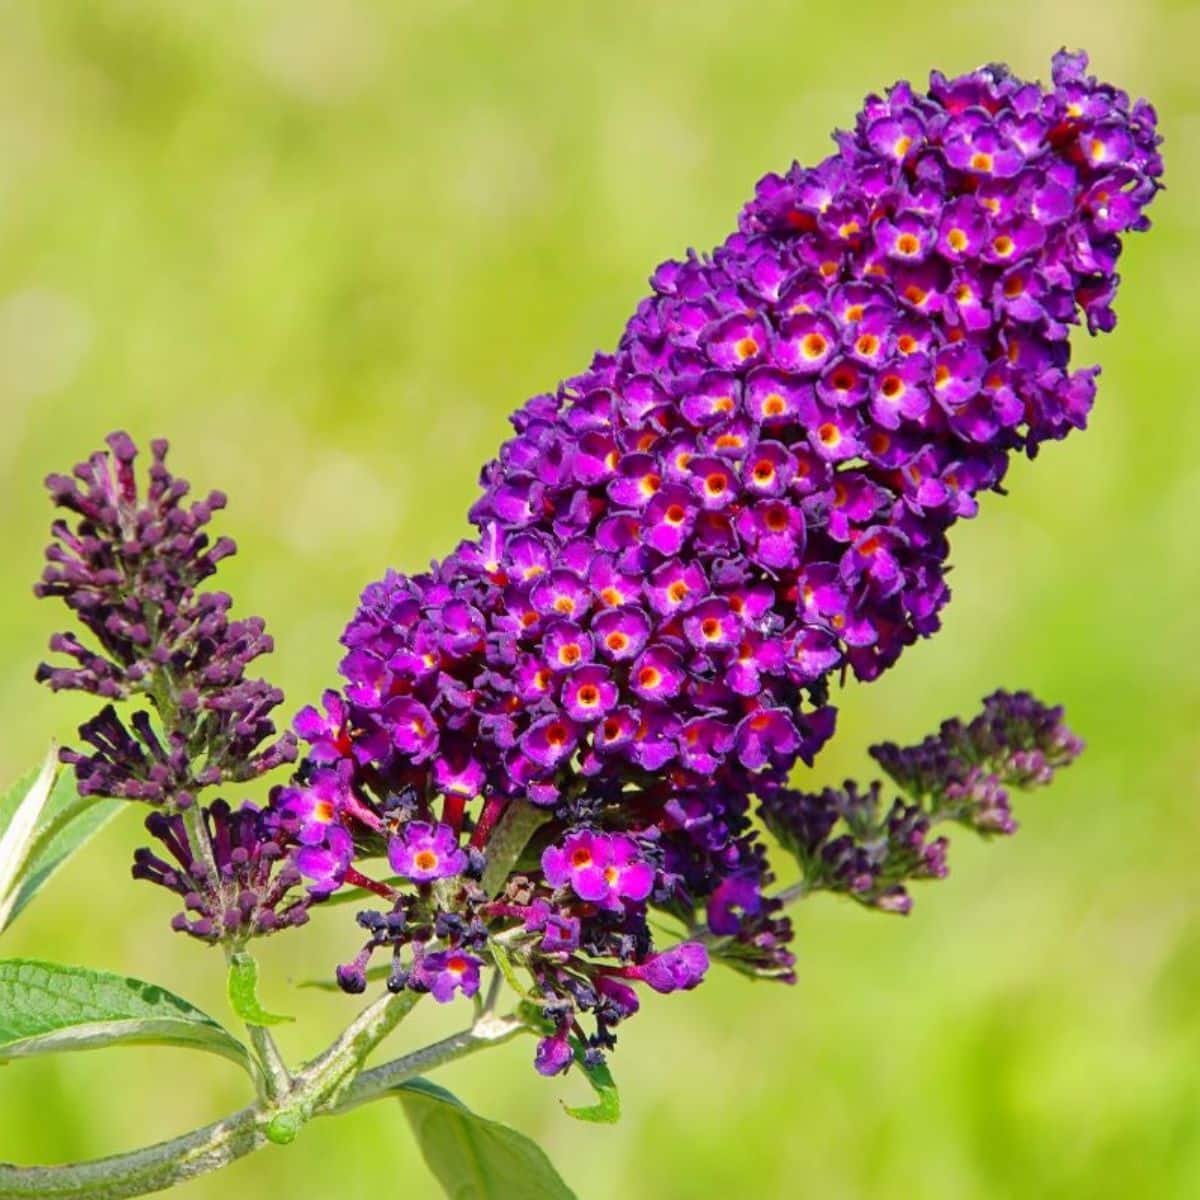 A close-up of a beautiful vibrant purple blooming butterfly bush on a sunnny day.